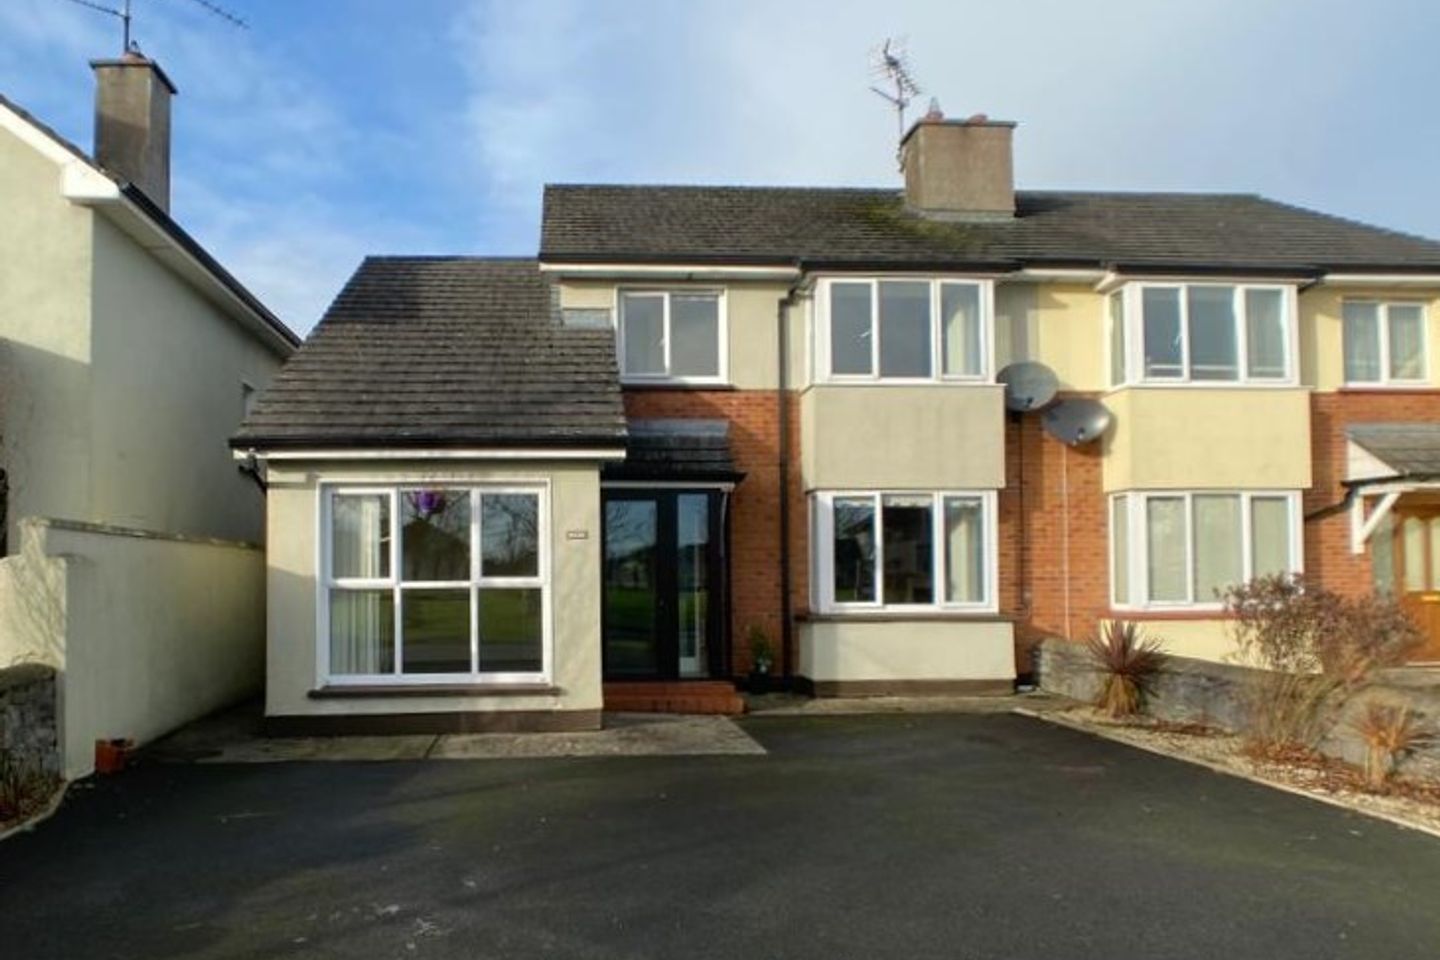 108 Palace Fields, Tuam, Co. Galway